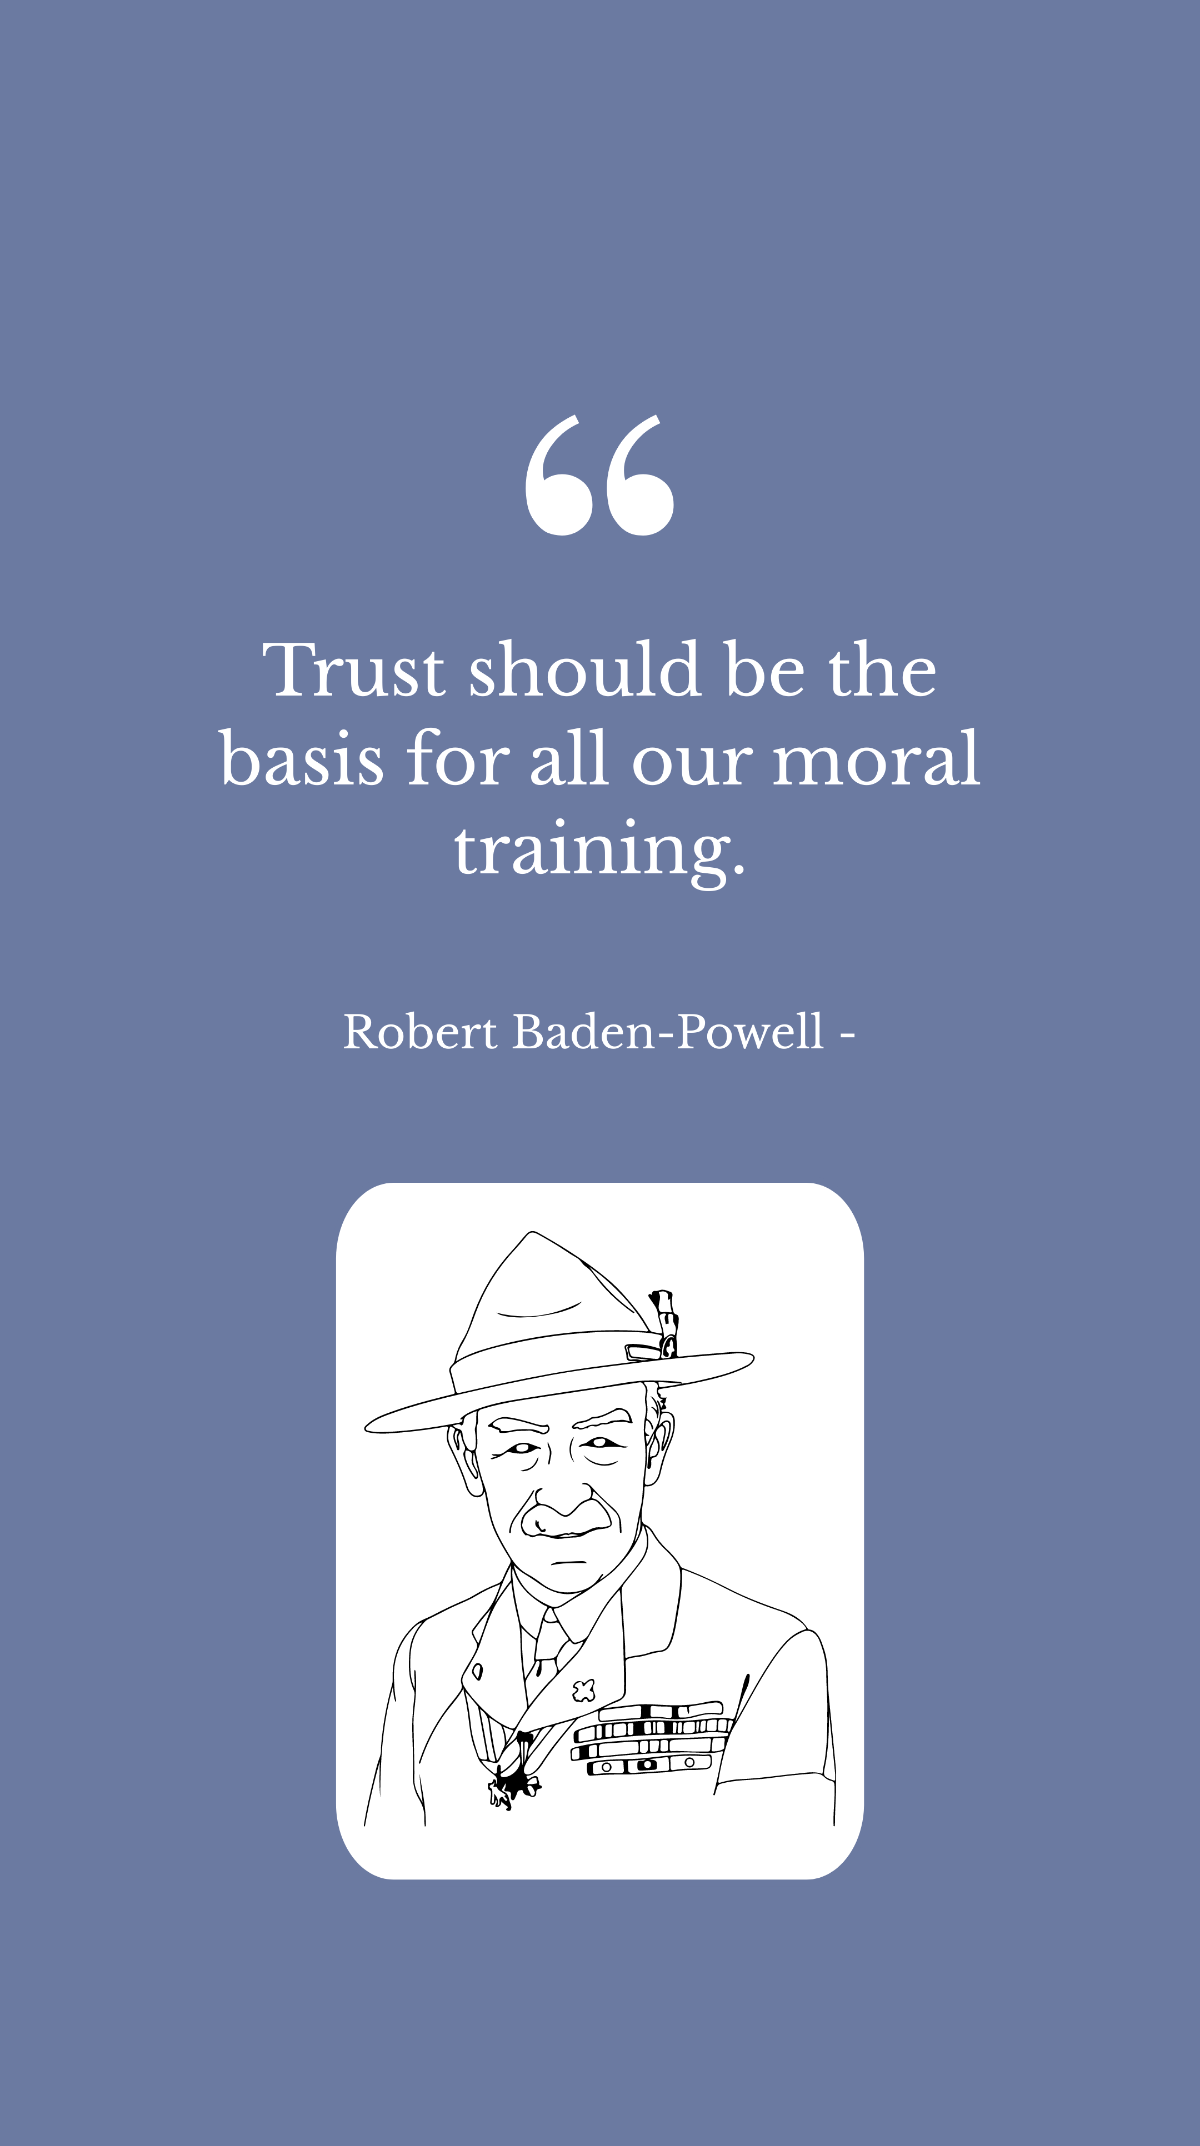 Free Robert Baden-Powell - Trust should be the basis for all our moral training. Template